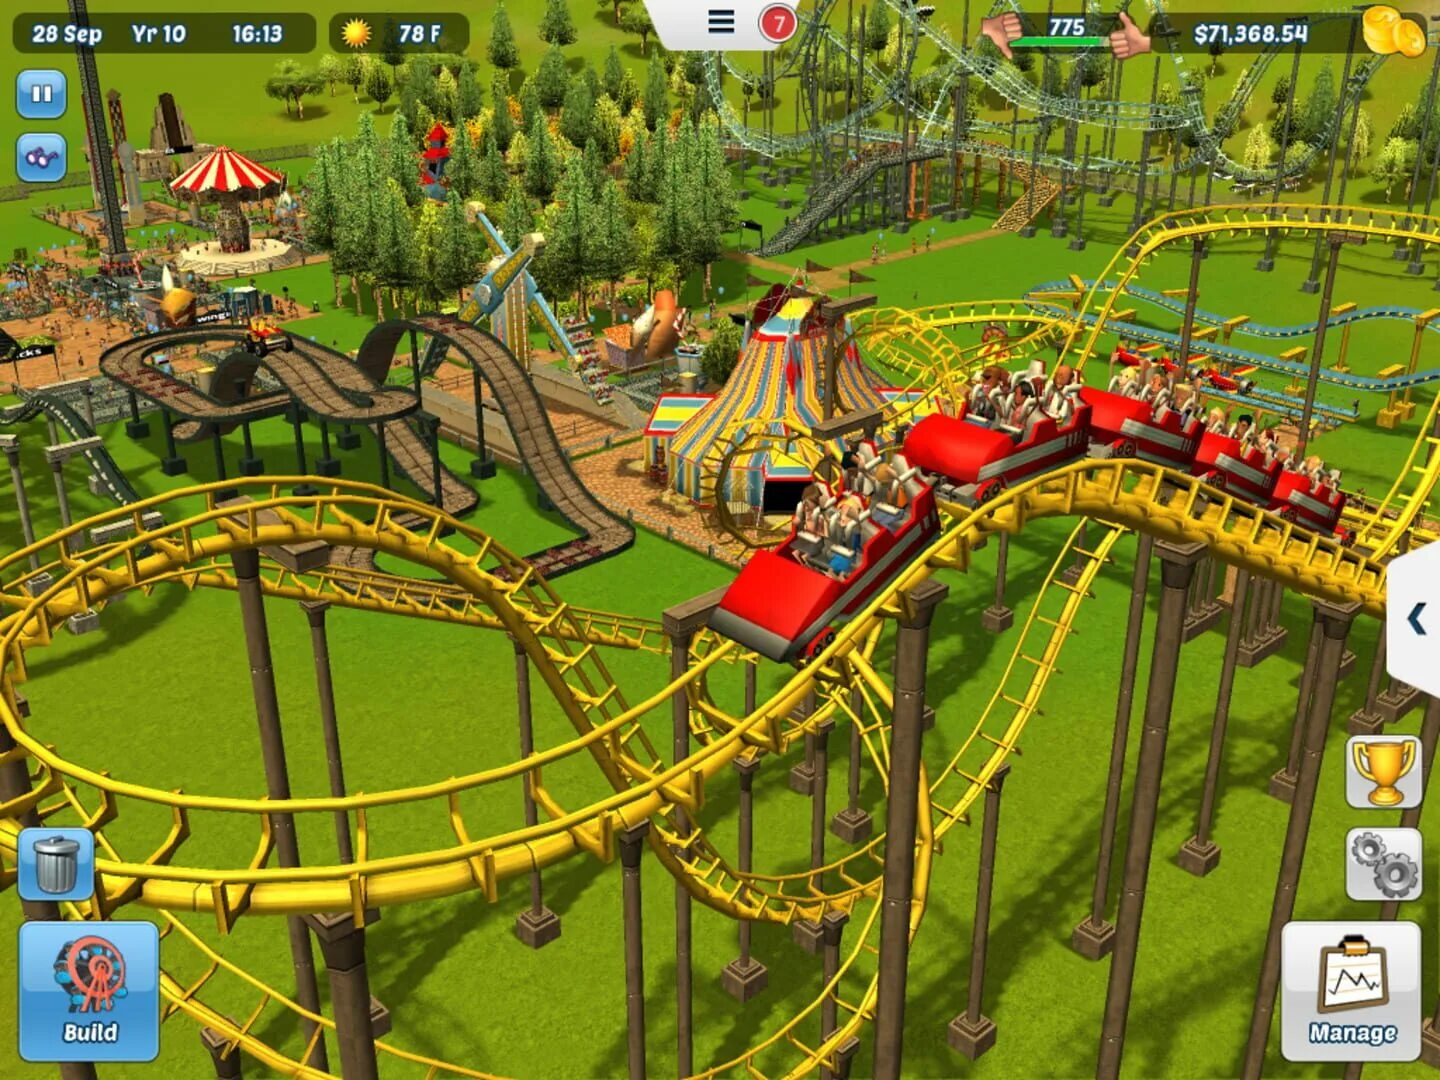 Rollercoaster Tycoon 3. Tycoon парк аттракционов. Roller Tycoon аттракционы. Rollercoaster 2000. Game park is